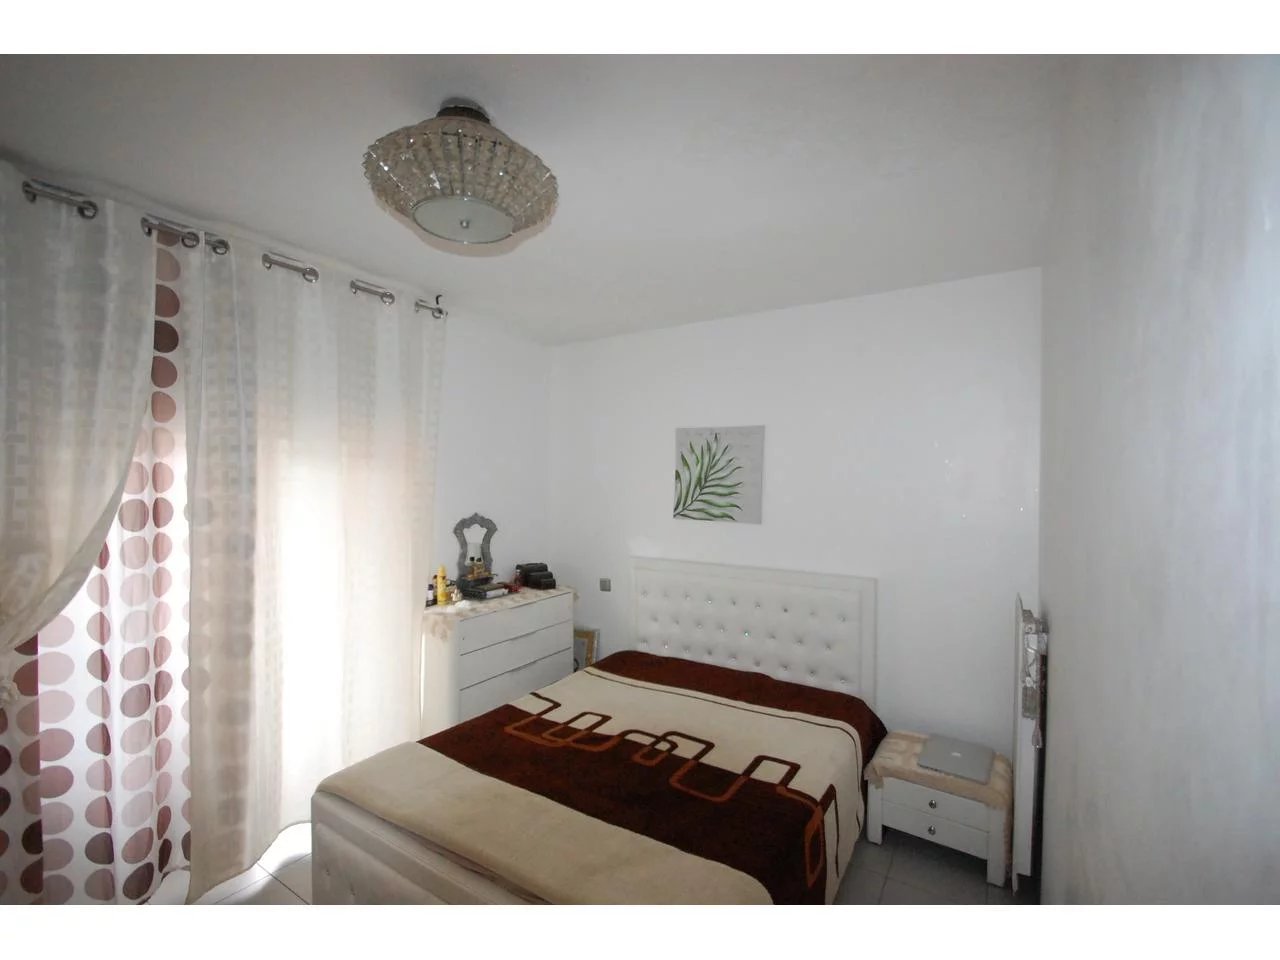 Appartement  3 Rooms 67.54m2  for sale   225 000 €